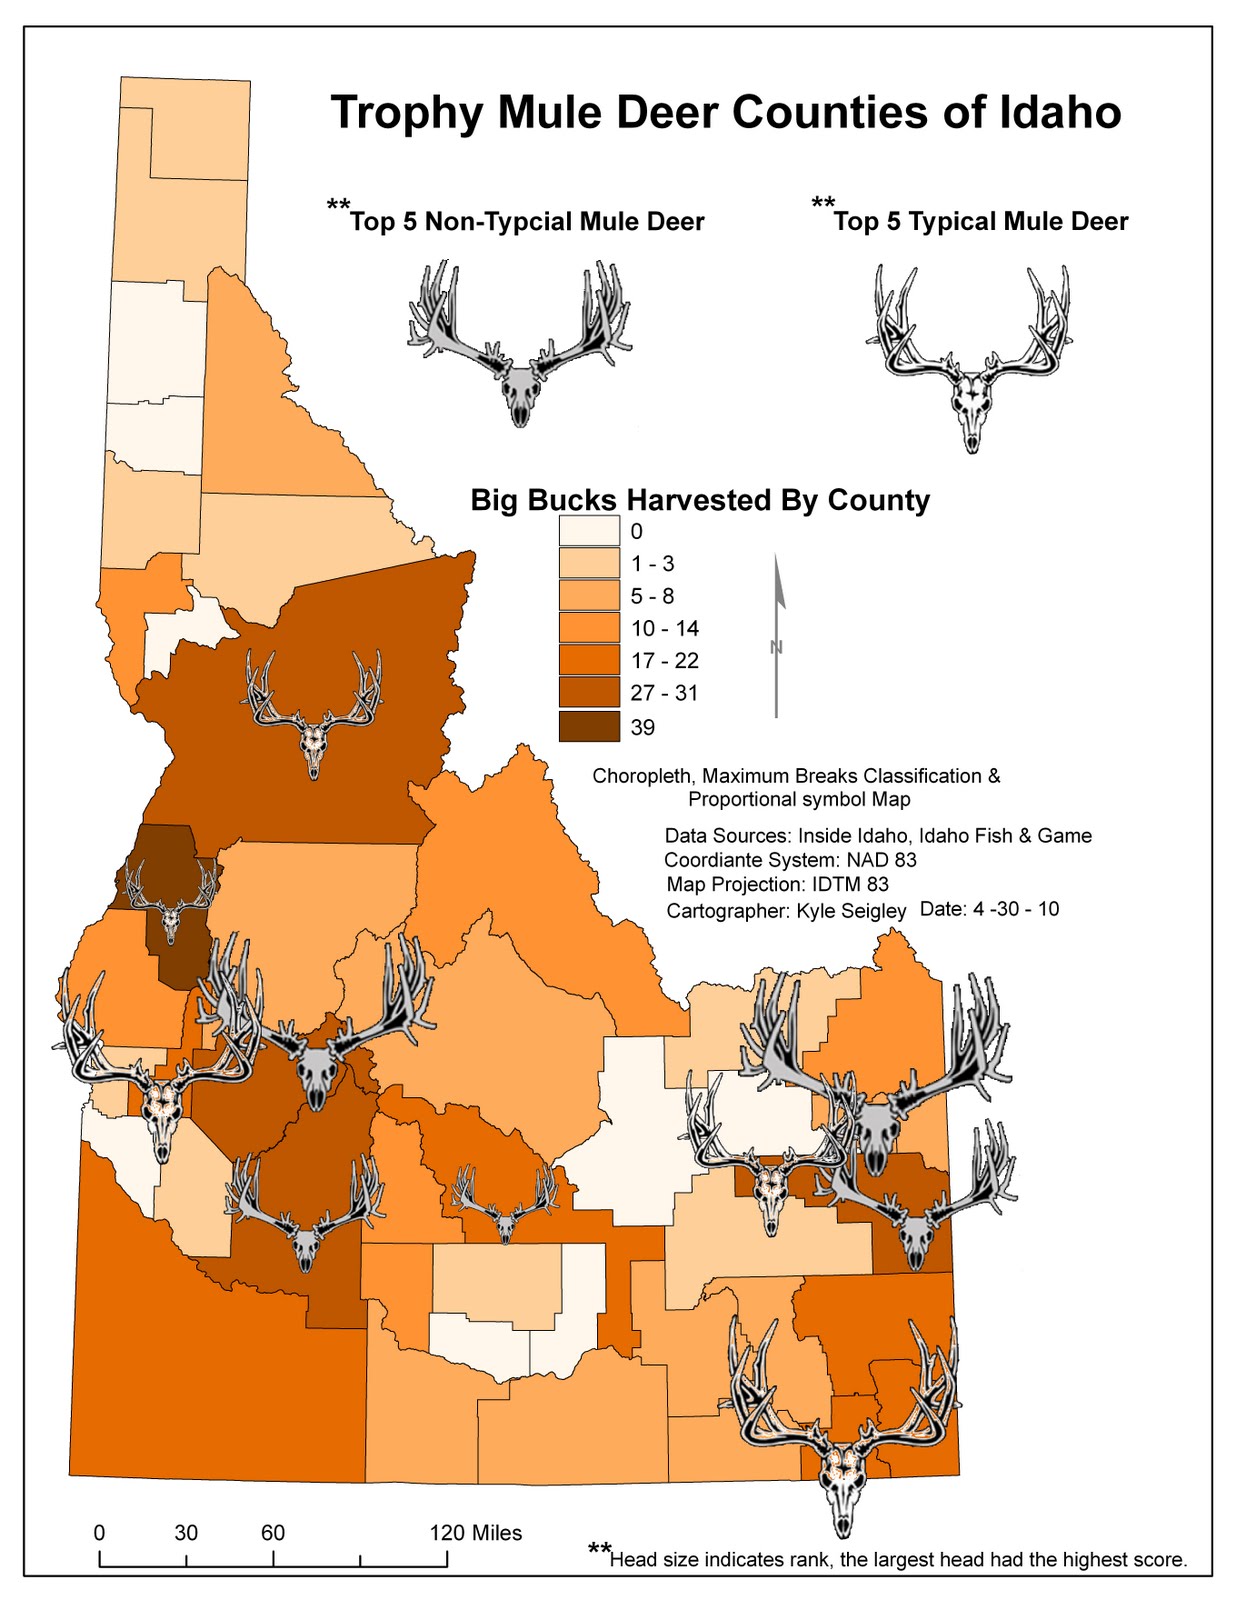 Seigley Blog: Map #1 (Trophy Mule Deer Counties of Idaho) Final Project